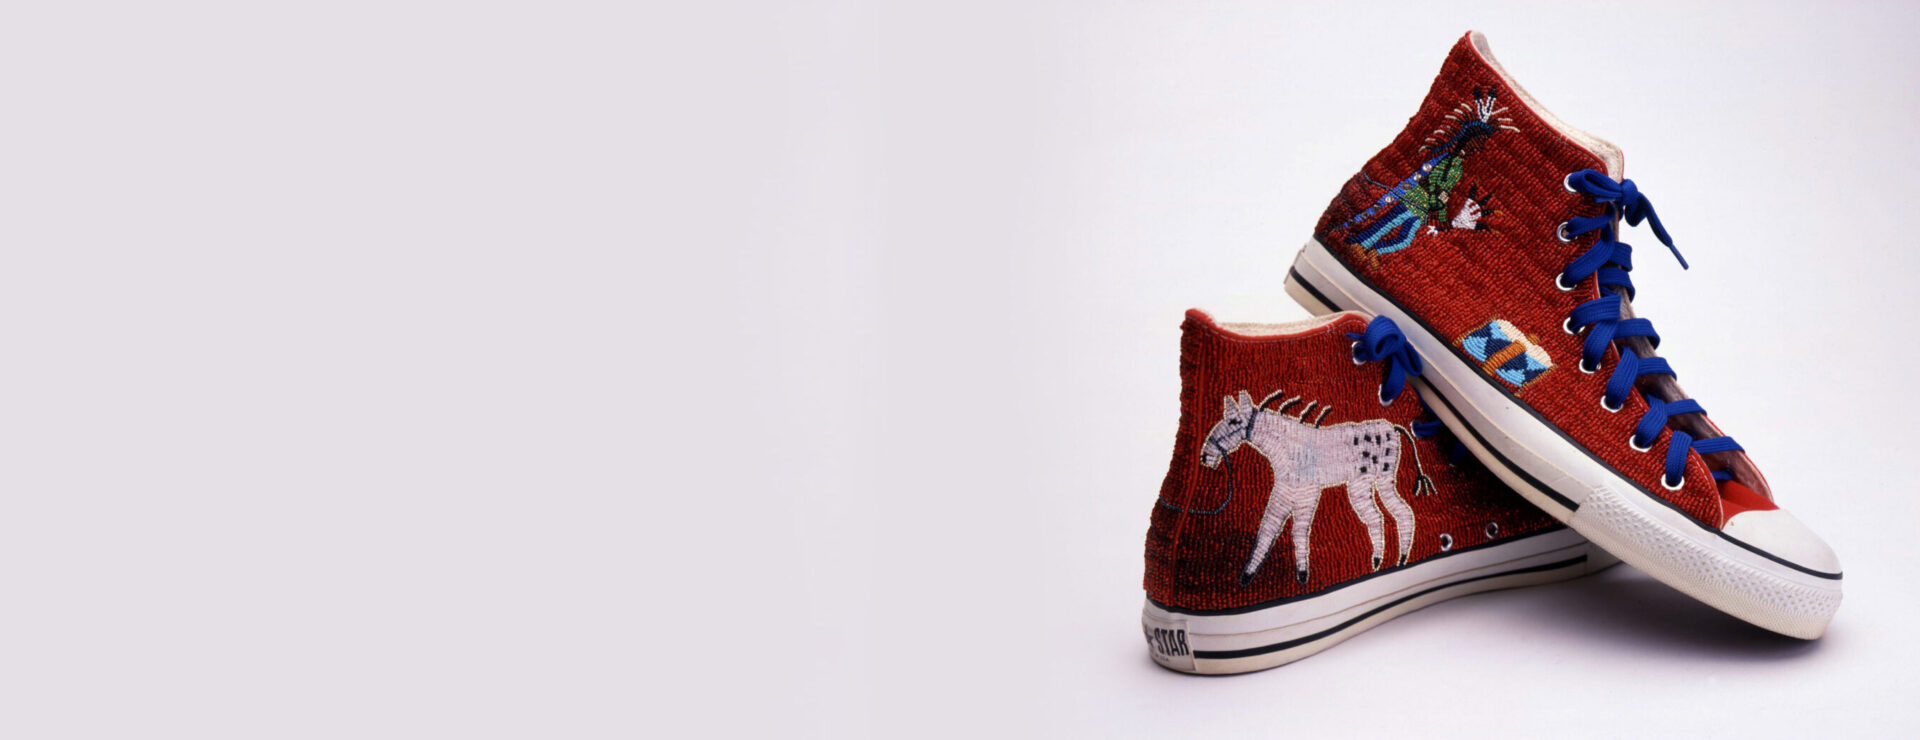 A pair of red, beaded Converse shoes with a white horse on them and blue shoelaces.